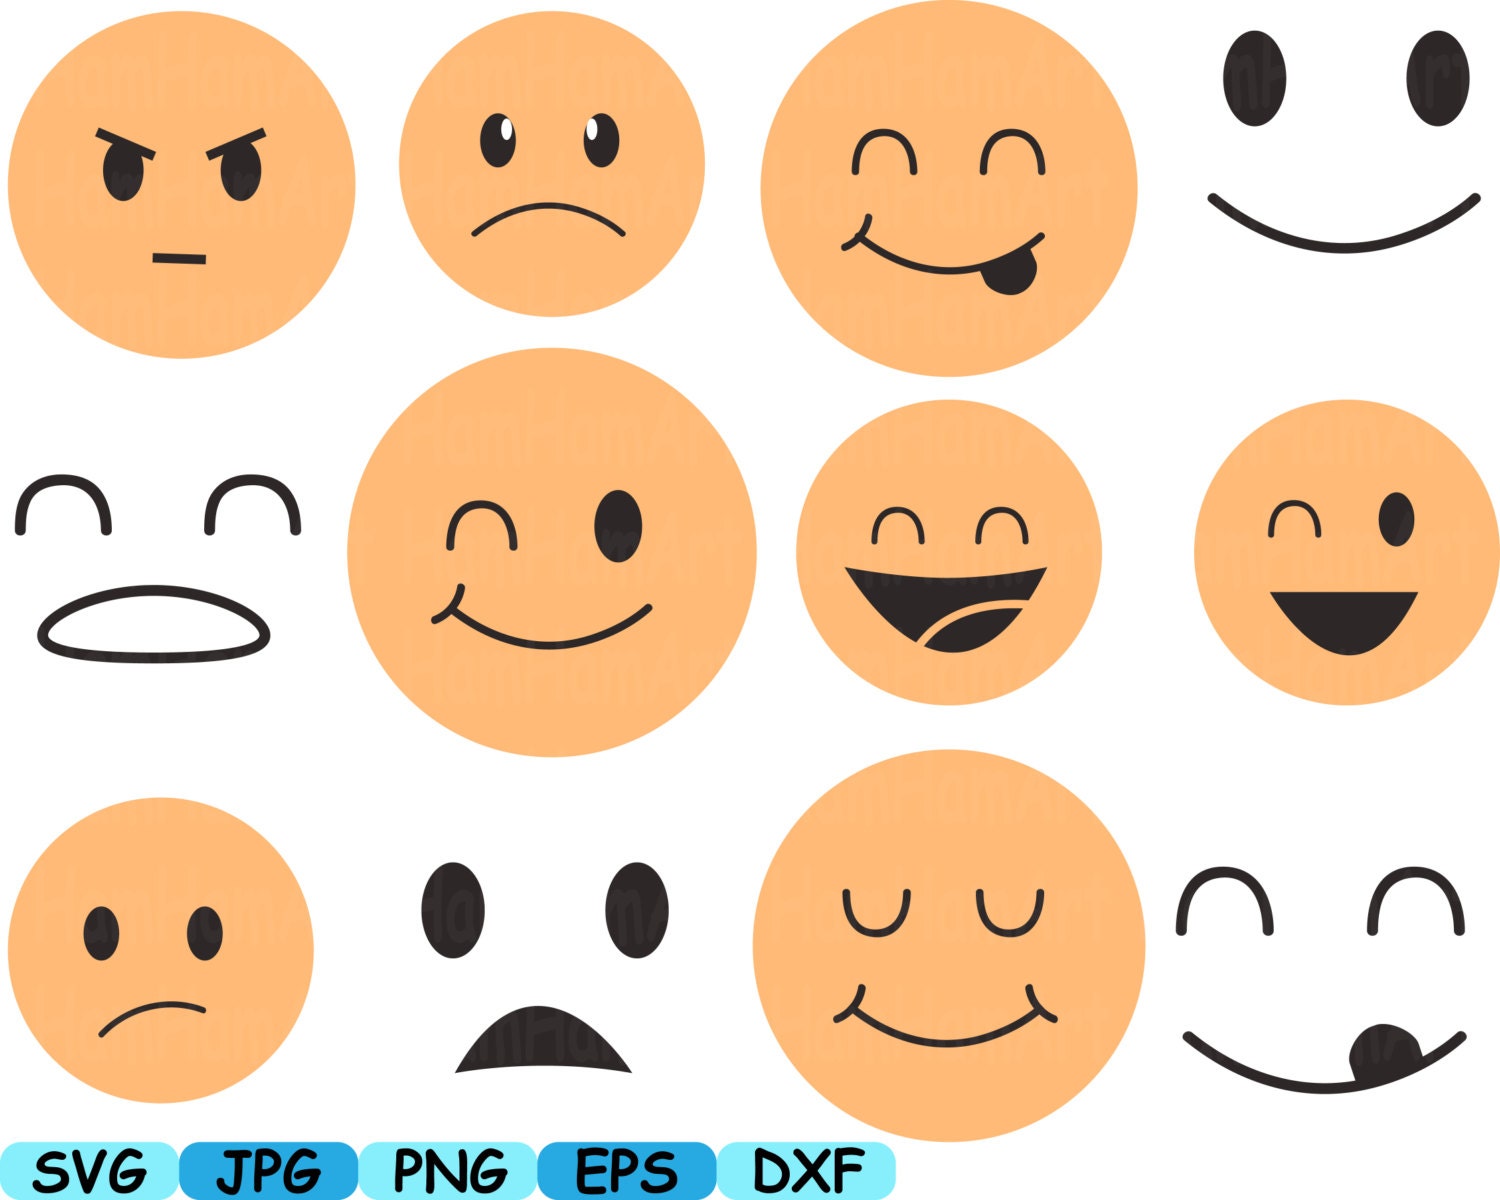 Download Smiley Faces Emoji v2 Silhouette Cameo Cutting Files cut SVG